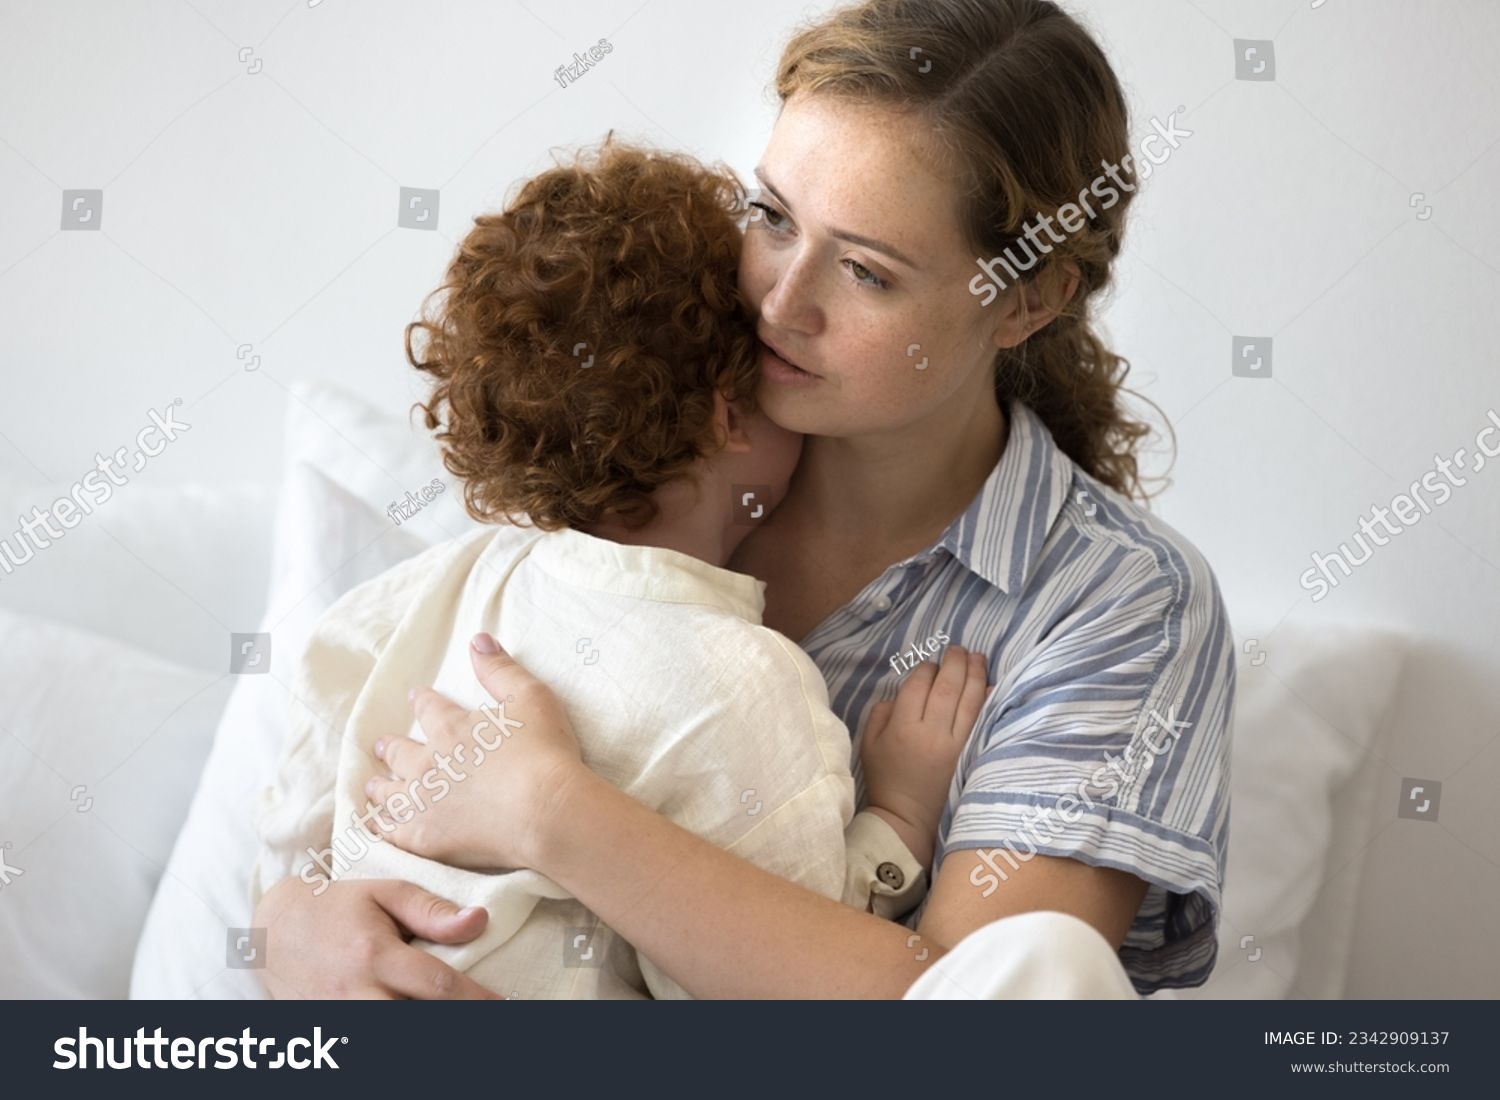 Caring young mom comforting crying toddler child, hugging little kid, holding in arms, giving support, love. Mother embracing little kid, enjoying motherhood, parenthood #2342909137